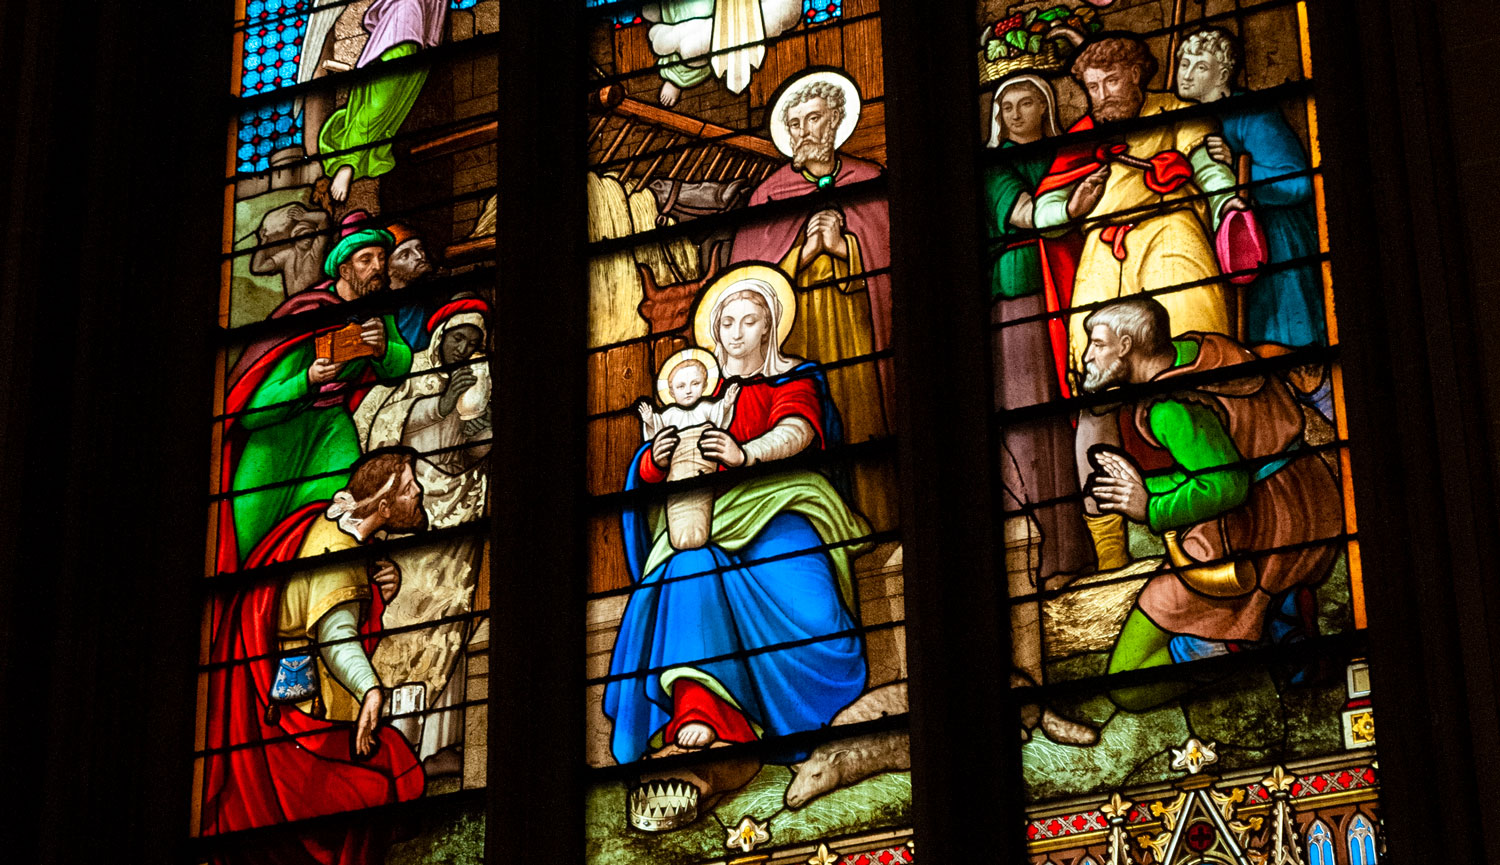 How to Read Stained Glass Windows